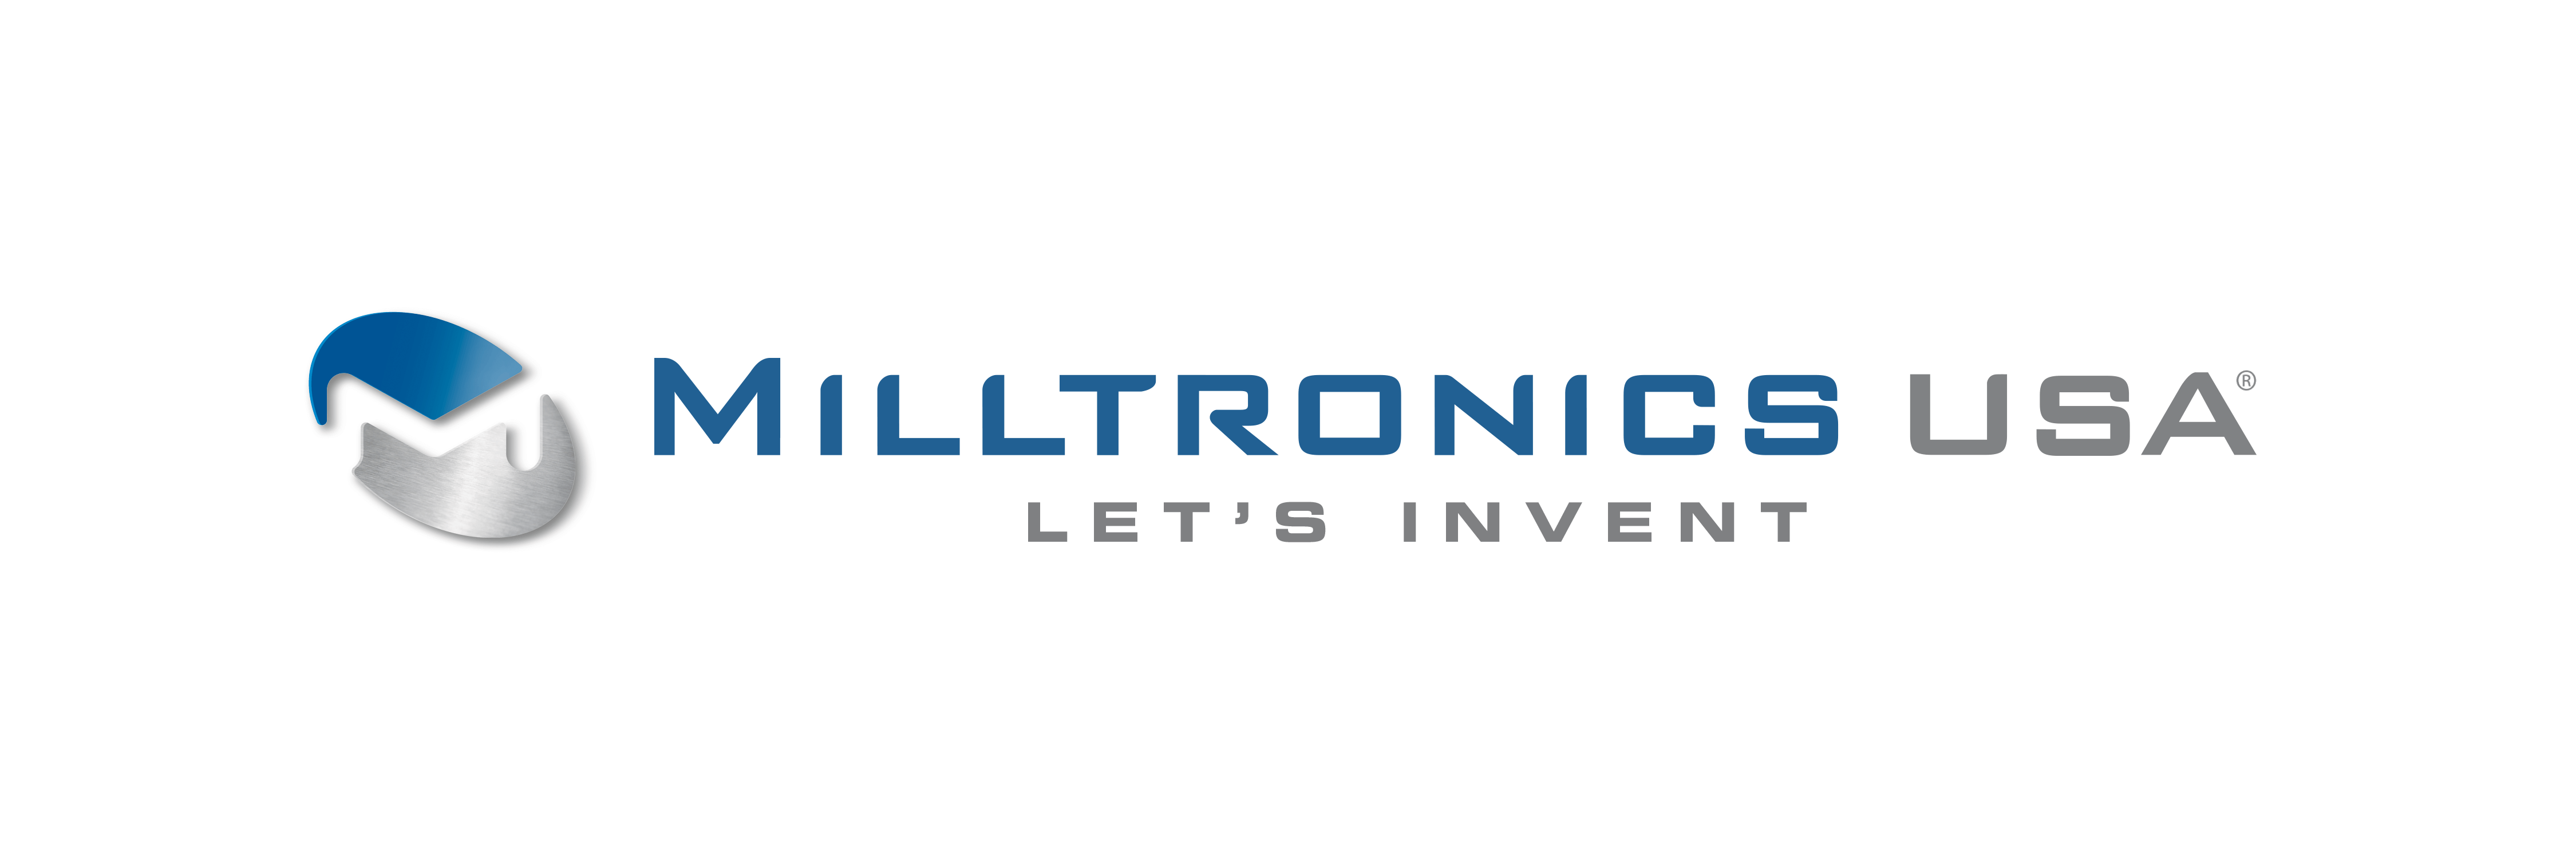 Milltronics Logo - Milltronics USA Logo | Milltronics USA - Let's Invent